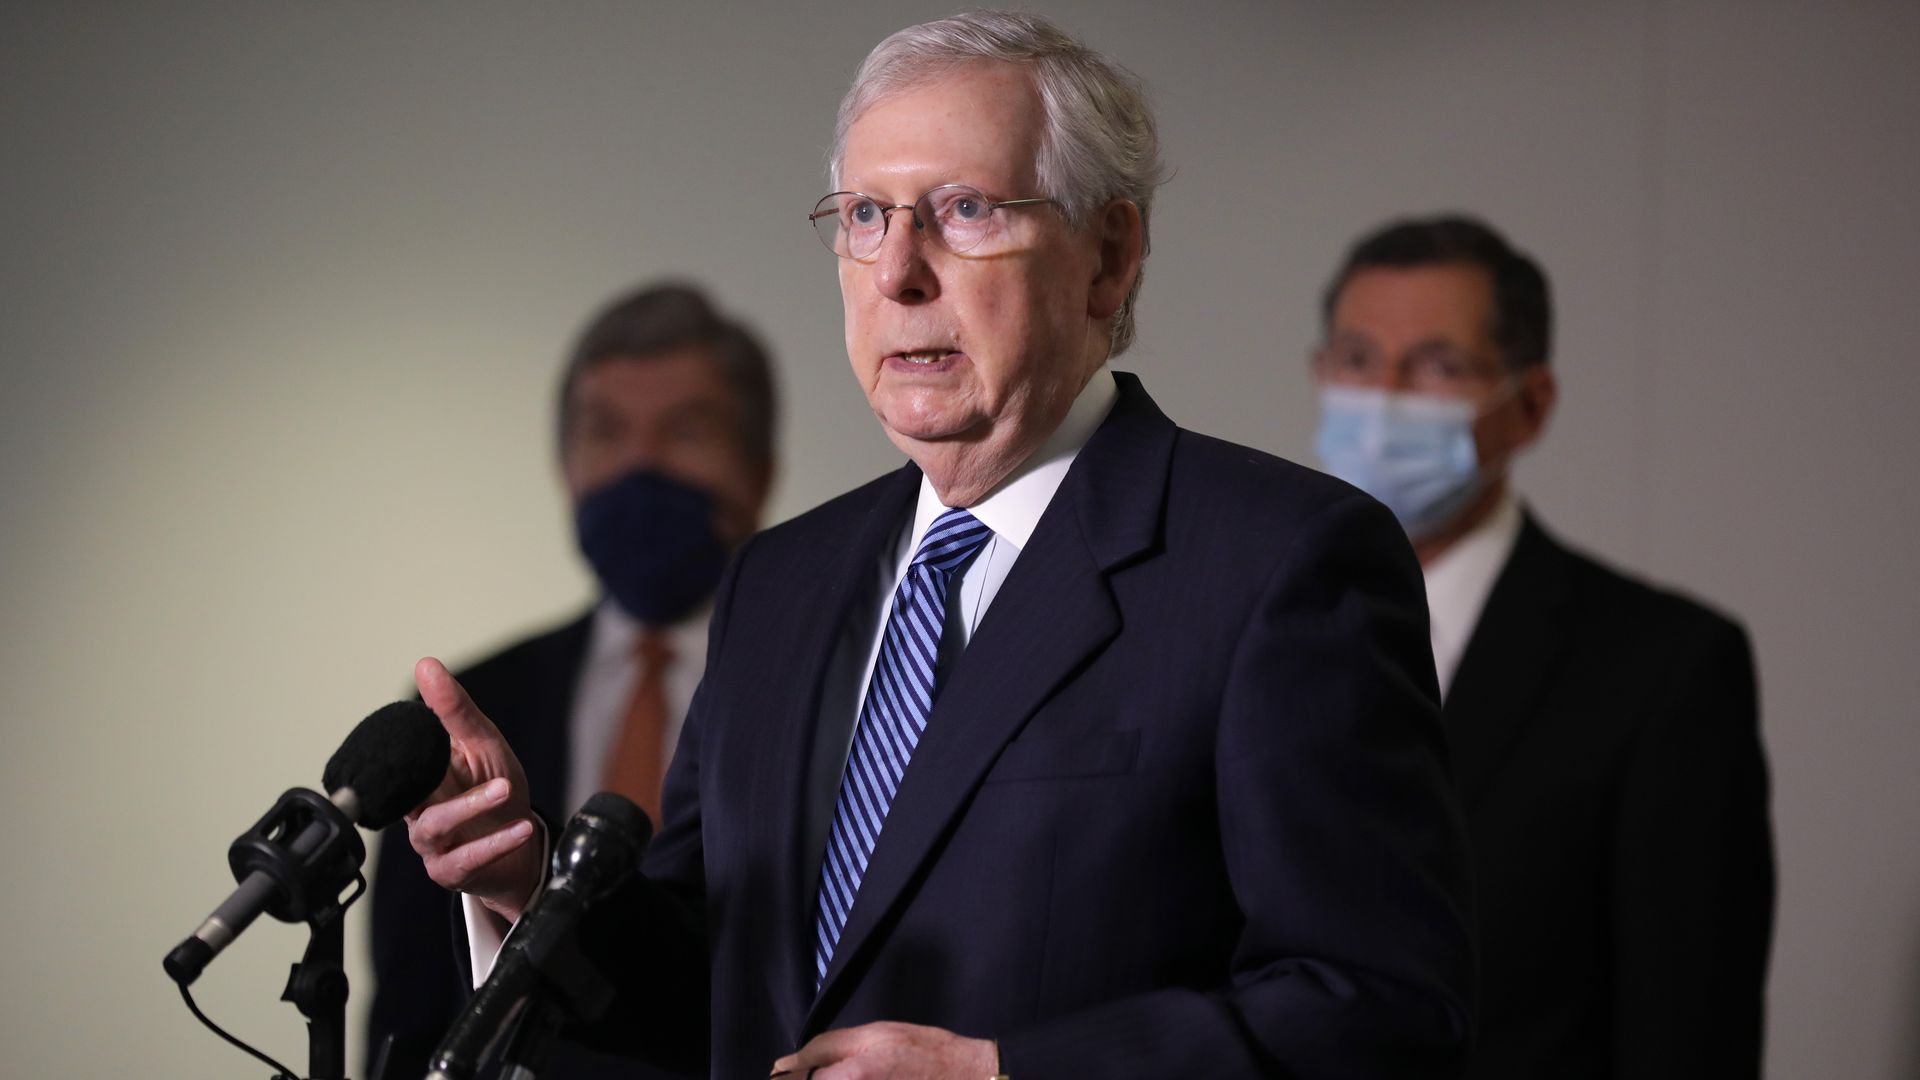 Senate Majority Leader Mitch McConnell (R-KY) talks to reporters following the weekly Republican policy luncheon in the Hart Senate Office Building on Capitol Hill September 15